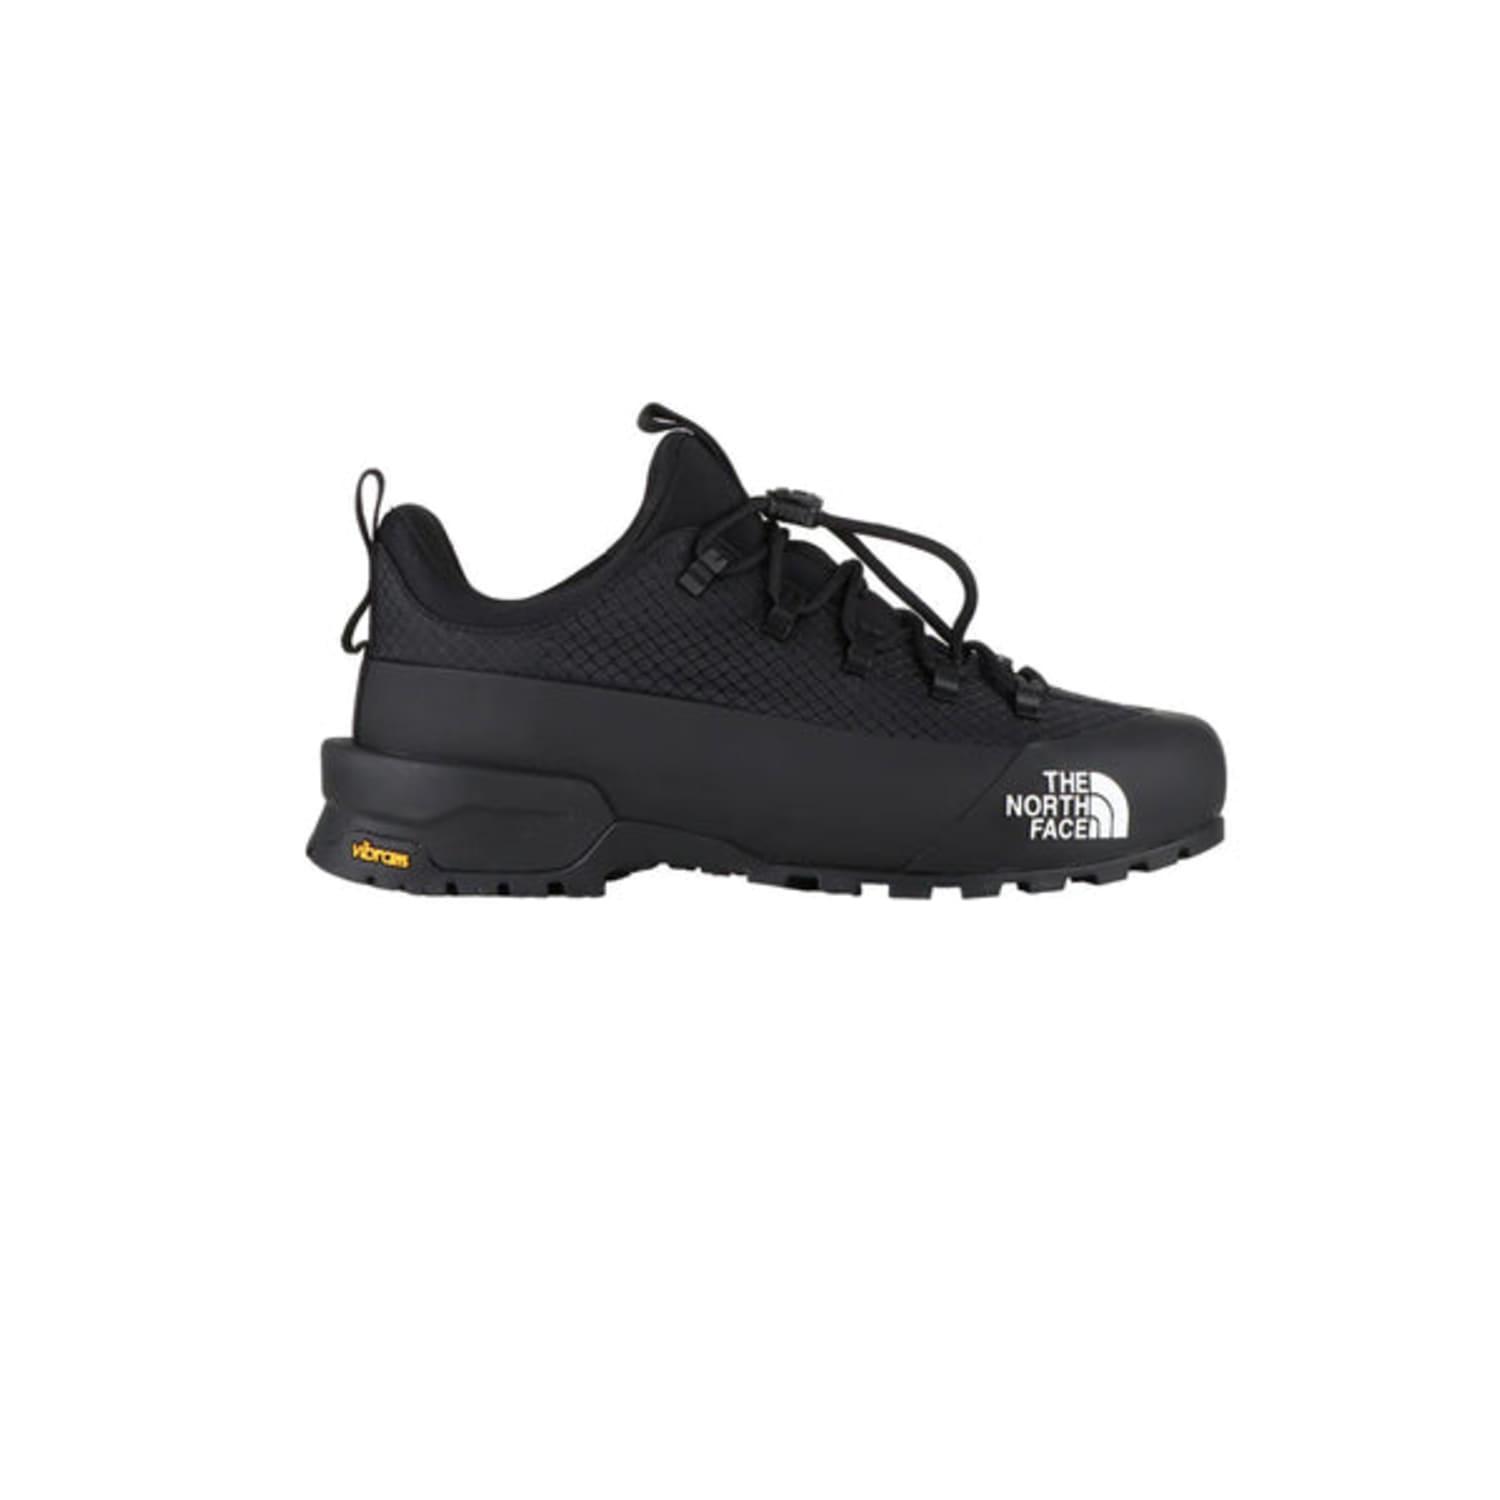 The North Face Black Nf0a817bkx7 W Shoes For for Men | Lyst